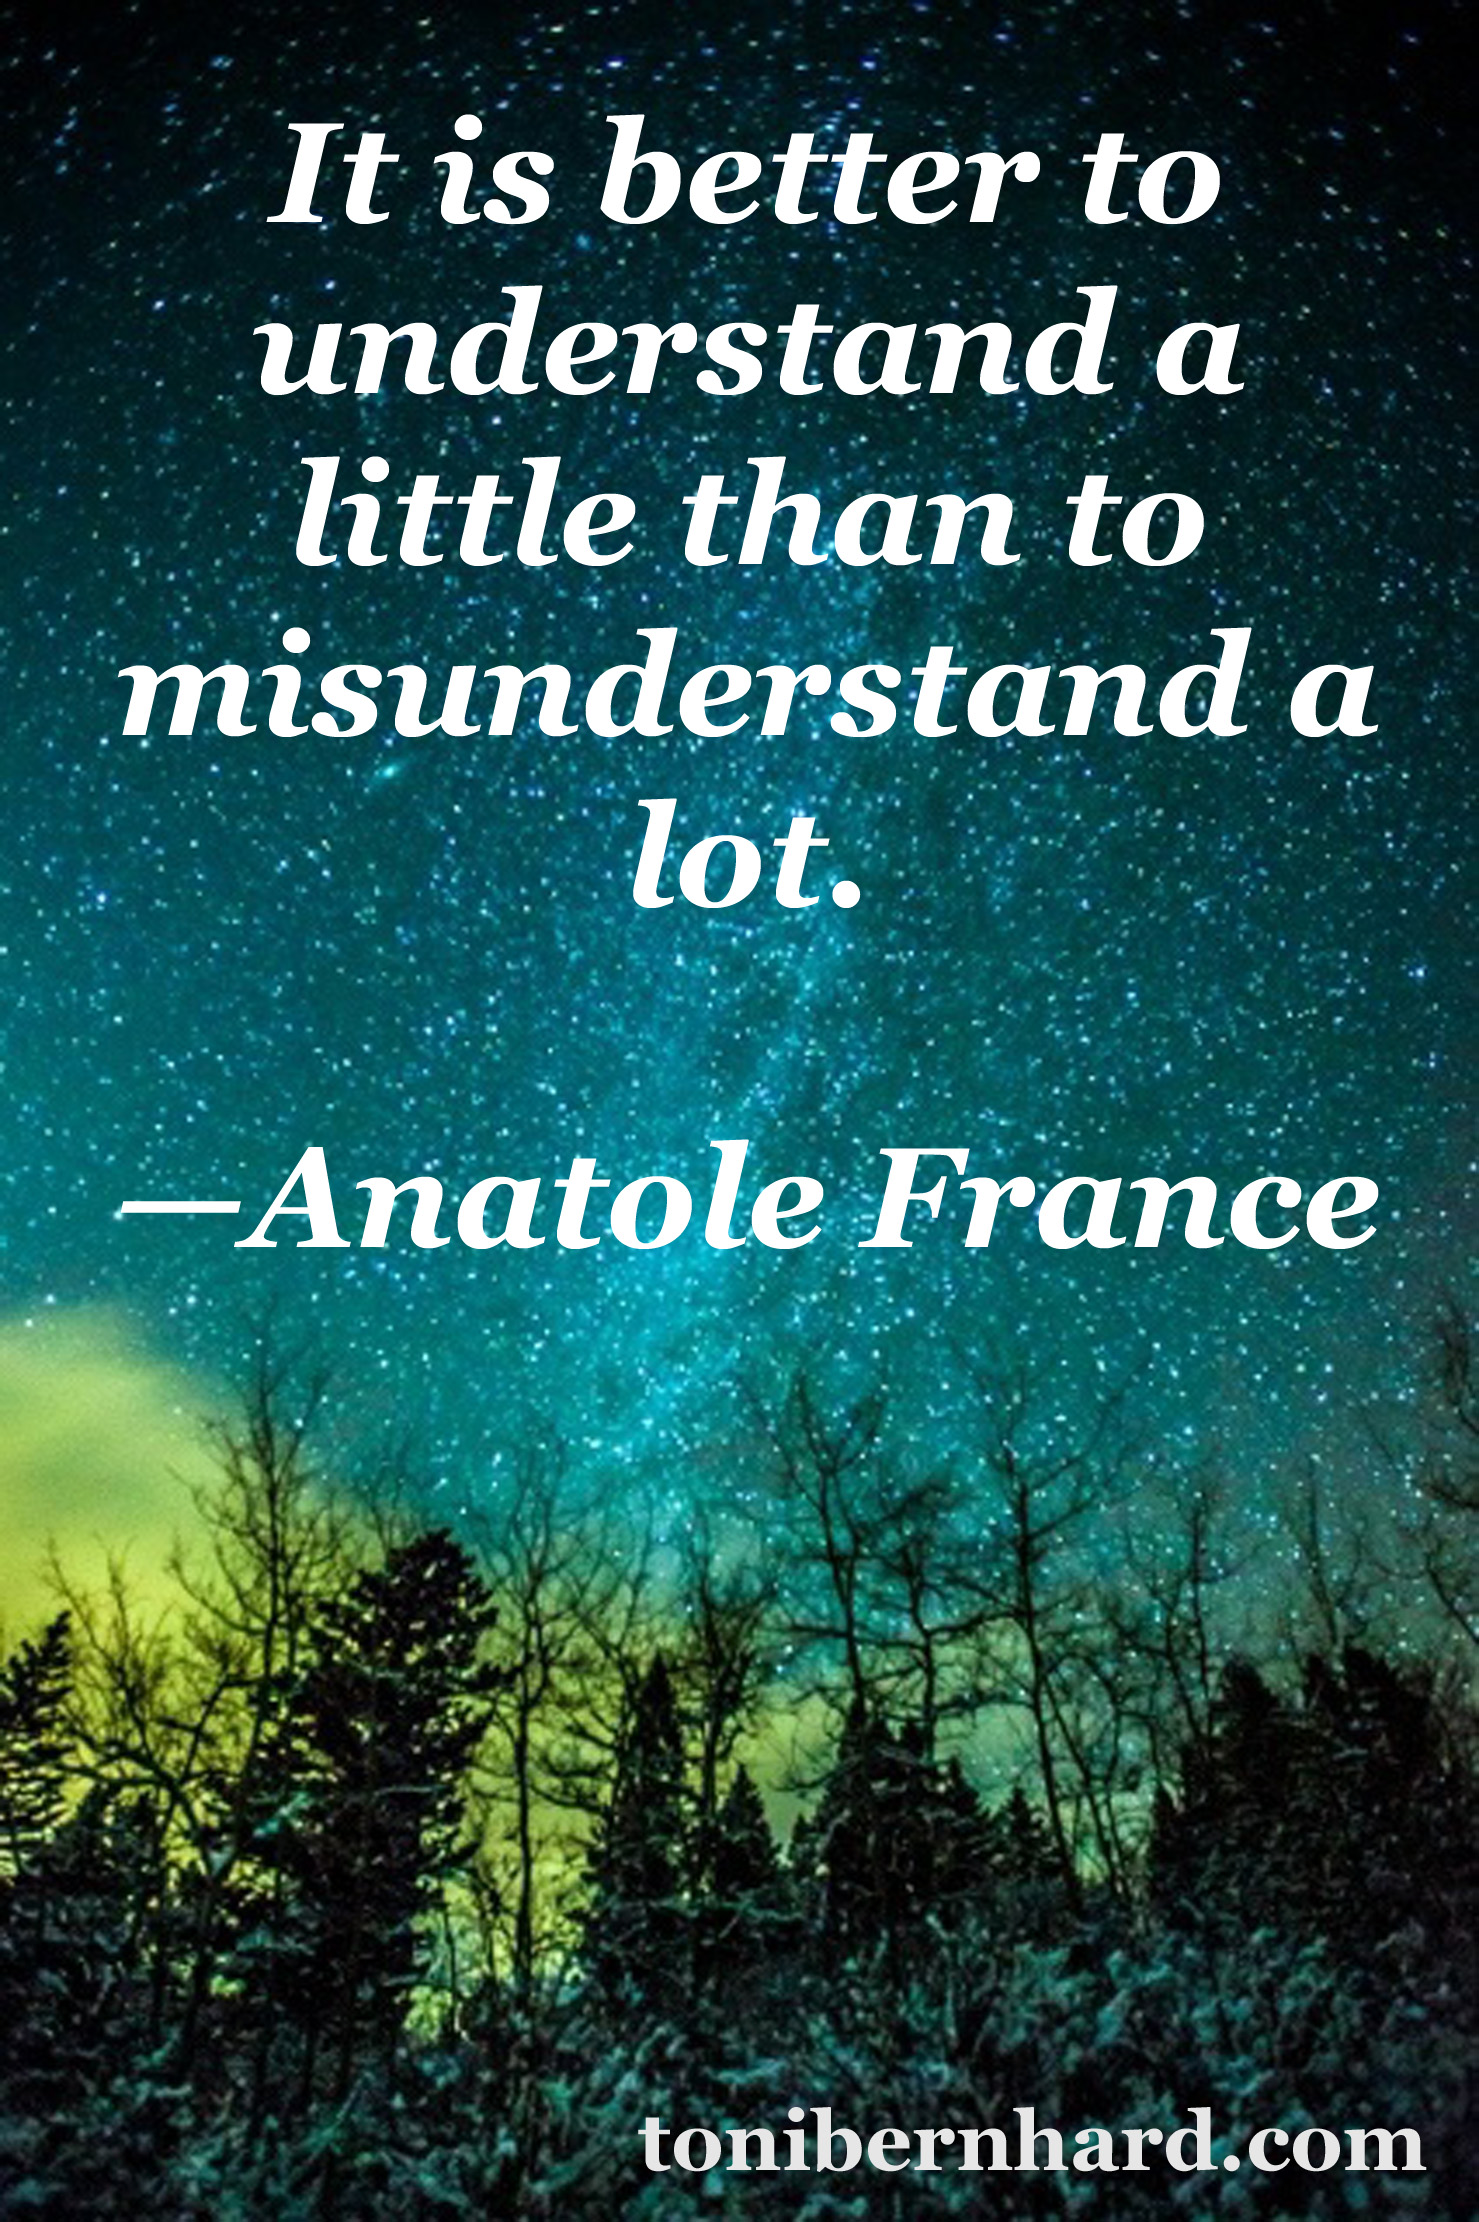 It is better to understand little than to misunderstand a lot. Anatole France